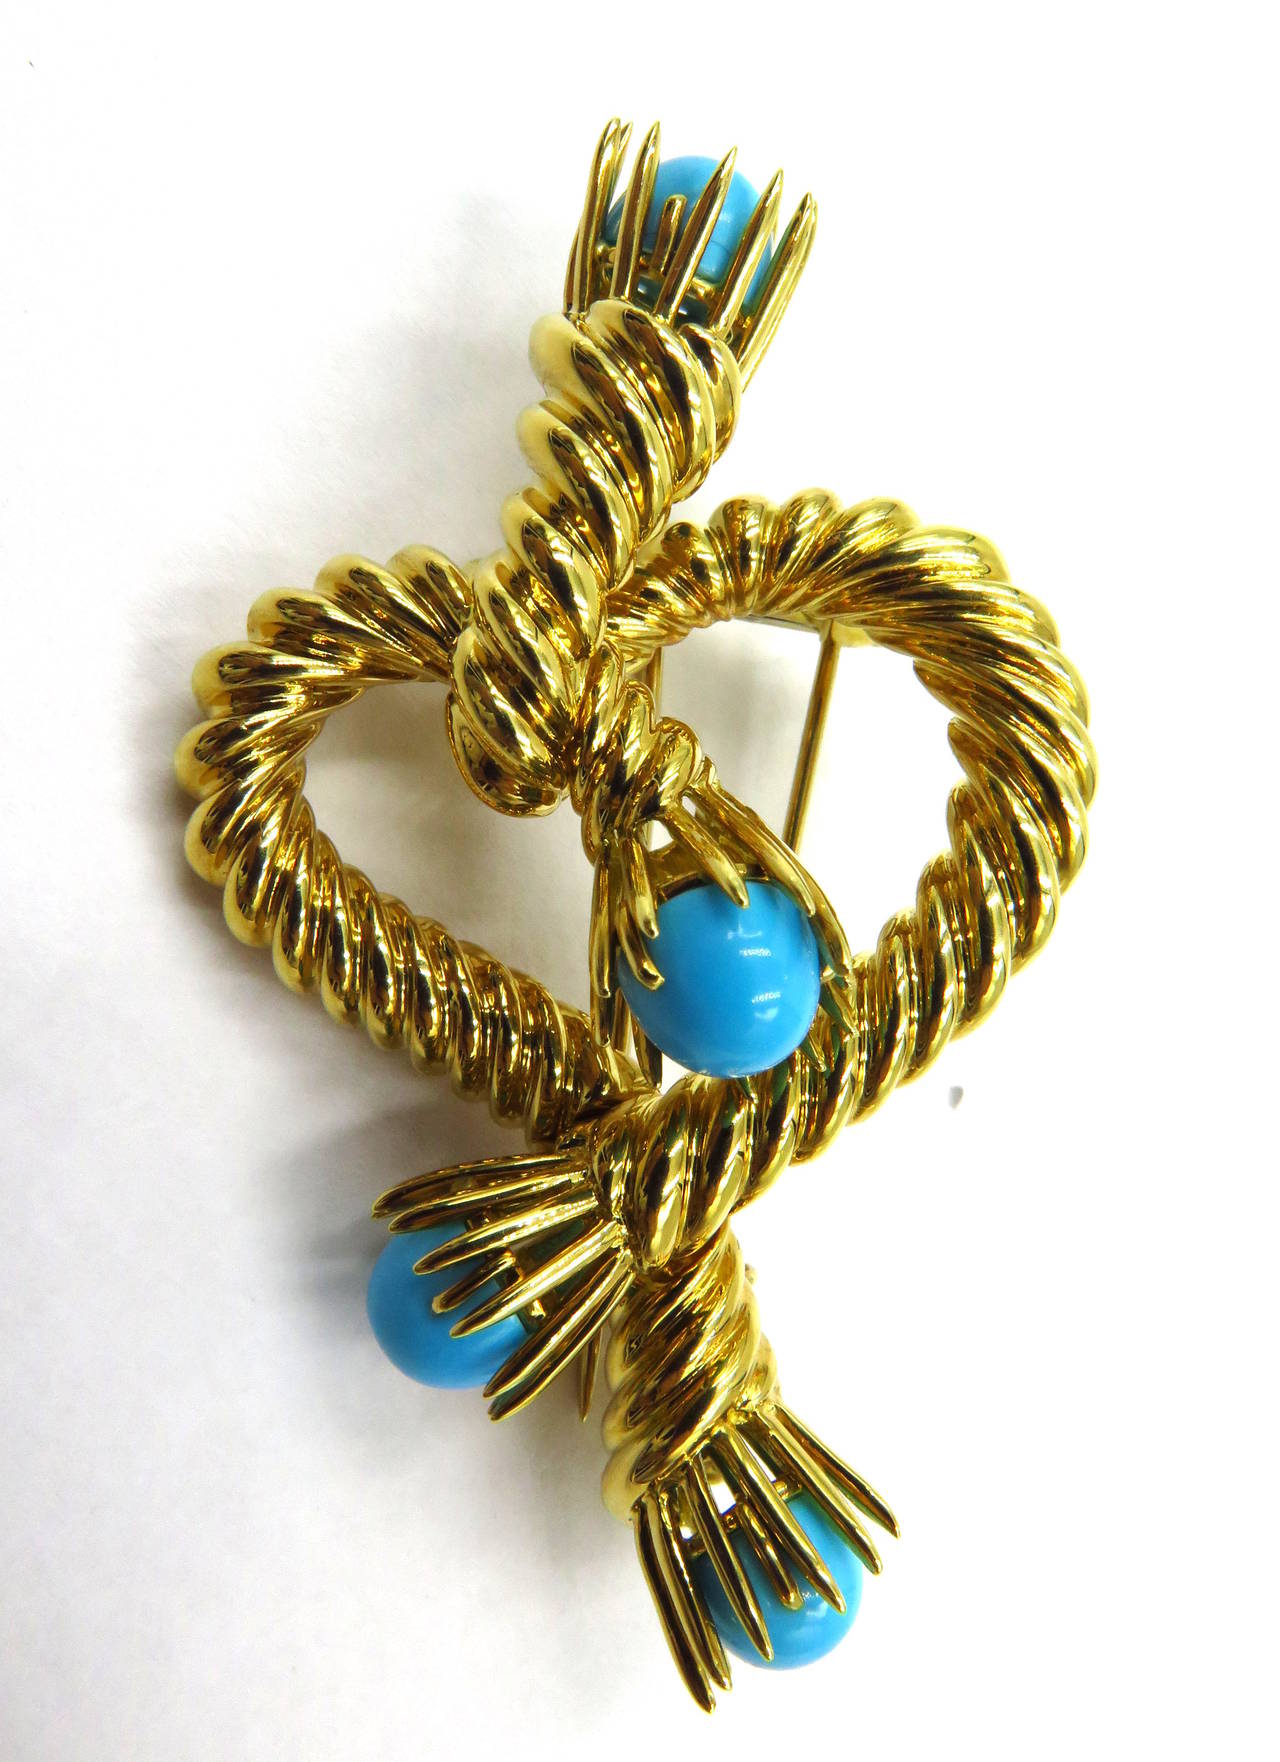  Tiffany & Co. Schlumberger Turquoise Gold Roped Heart Design Brooch 4